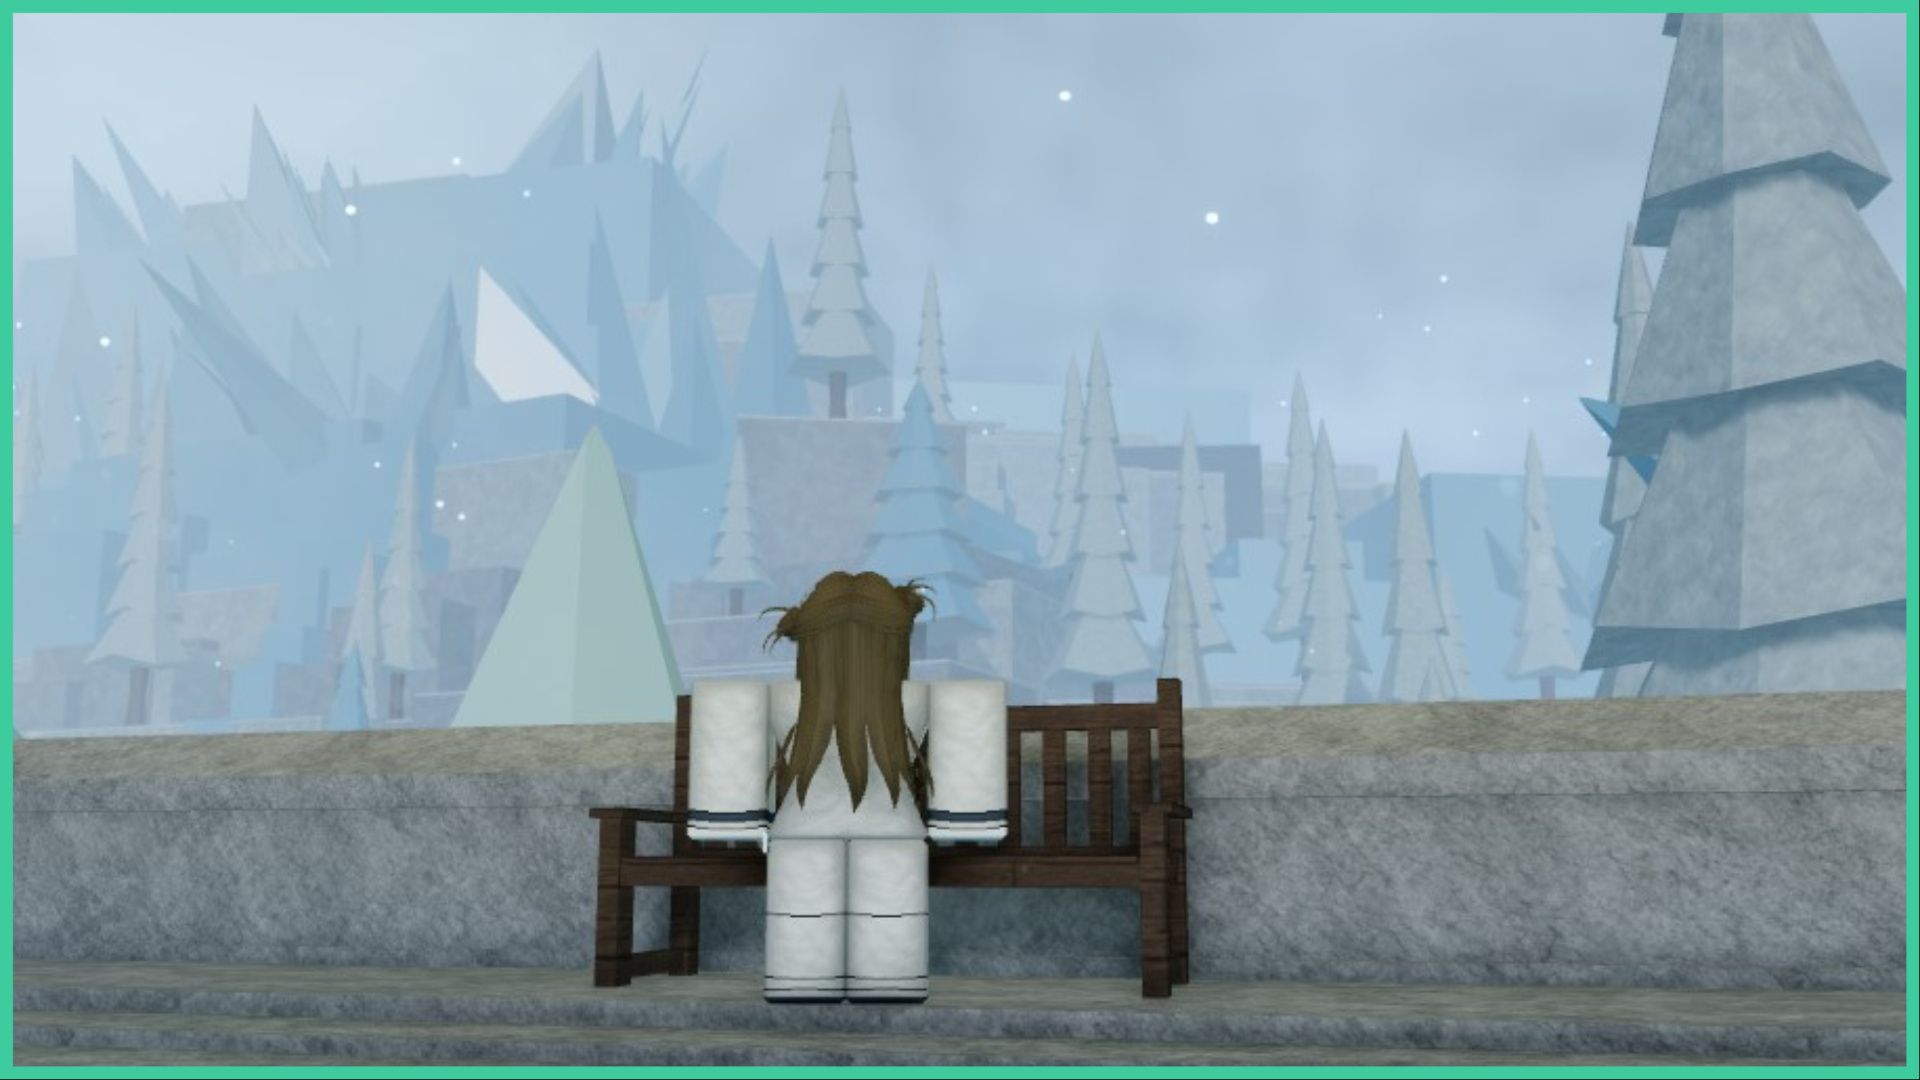 feature image for our type soul true hogyoku guide, it shows a quincy player standing in front of a bench looking out at the snowy forest, with snow-covered trees and mountains as snowflakes fall down from the sky